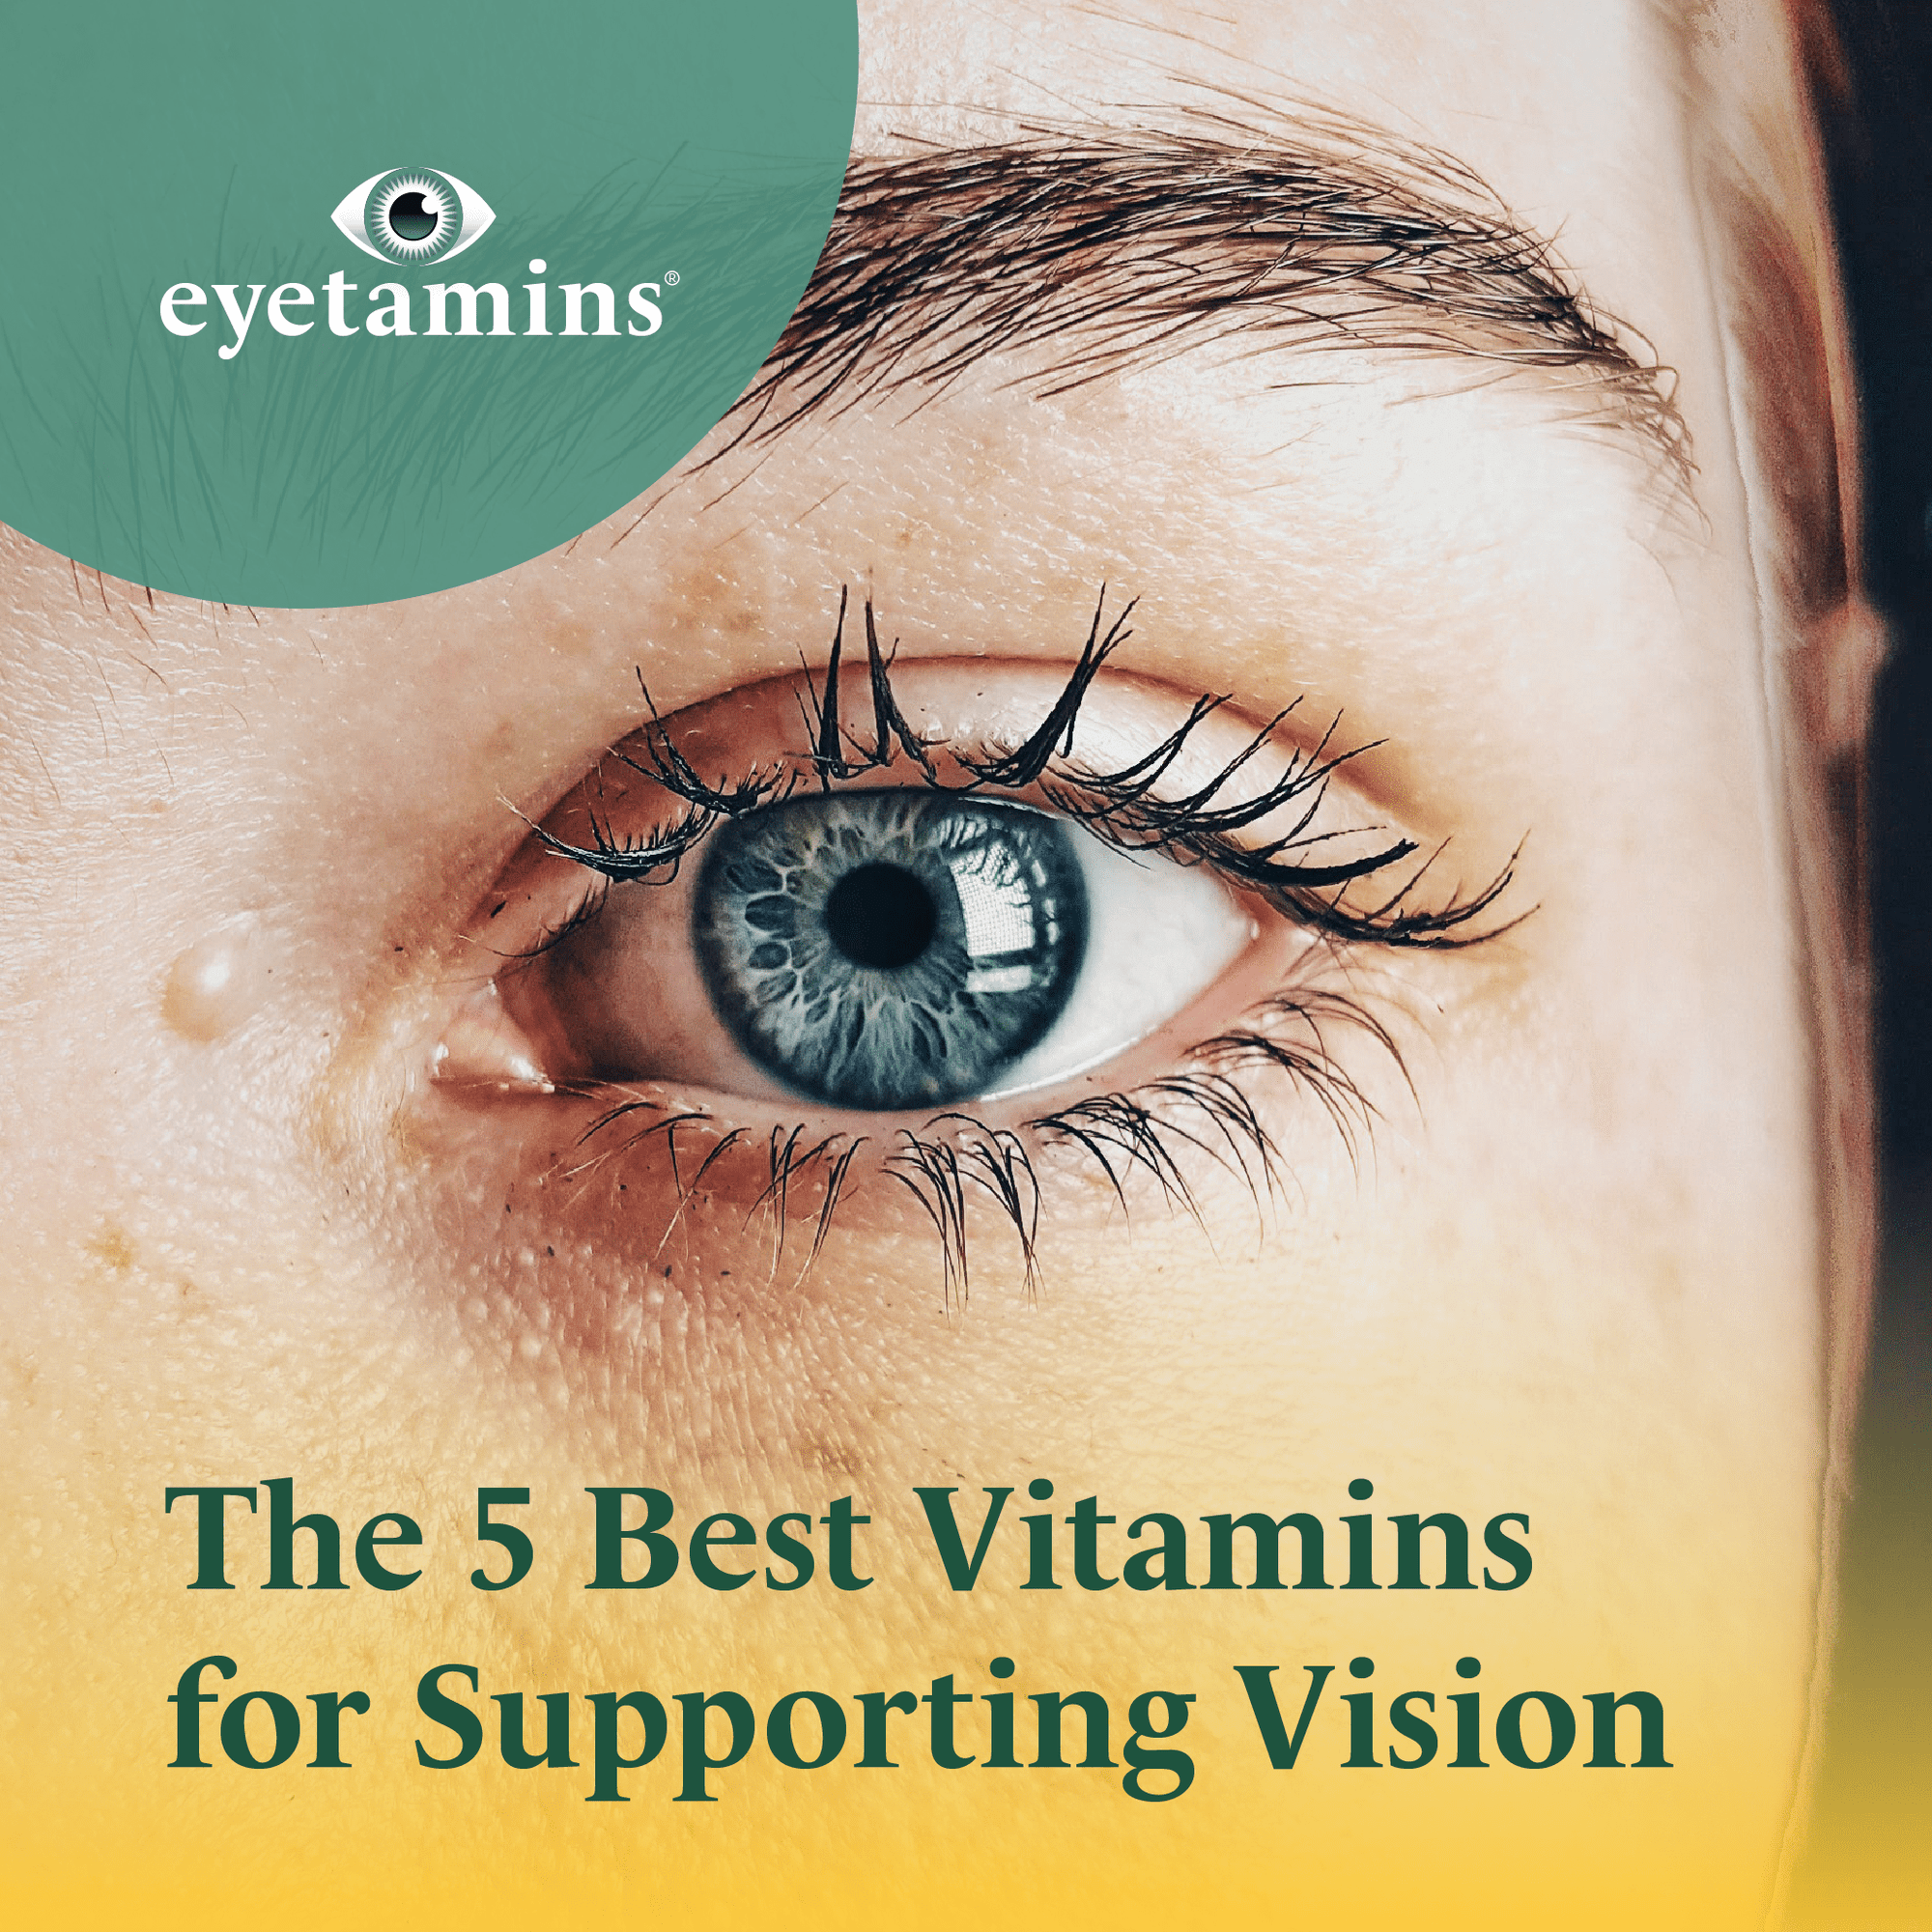 The 5 Best Vitamins for Supporting Vision